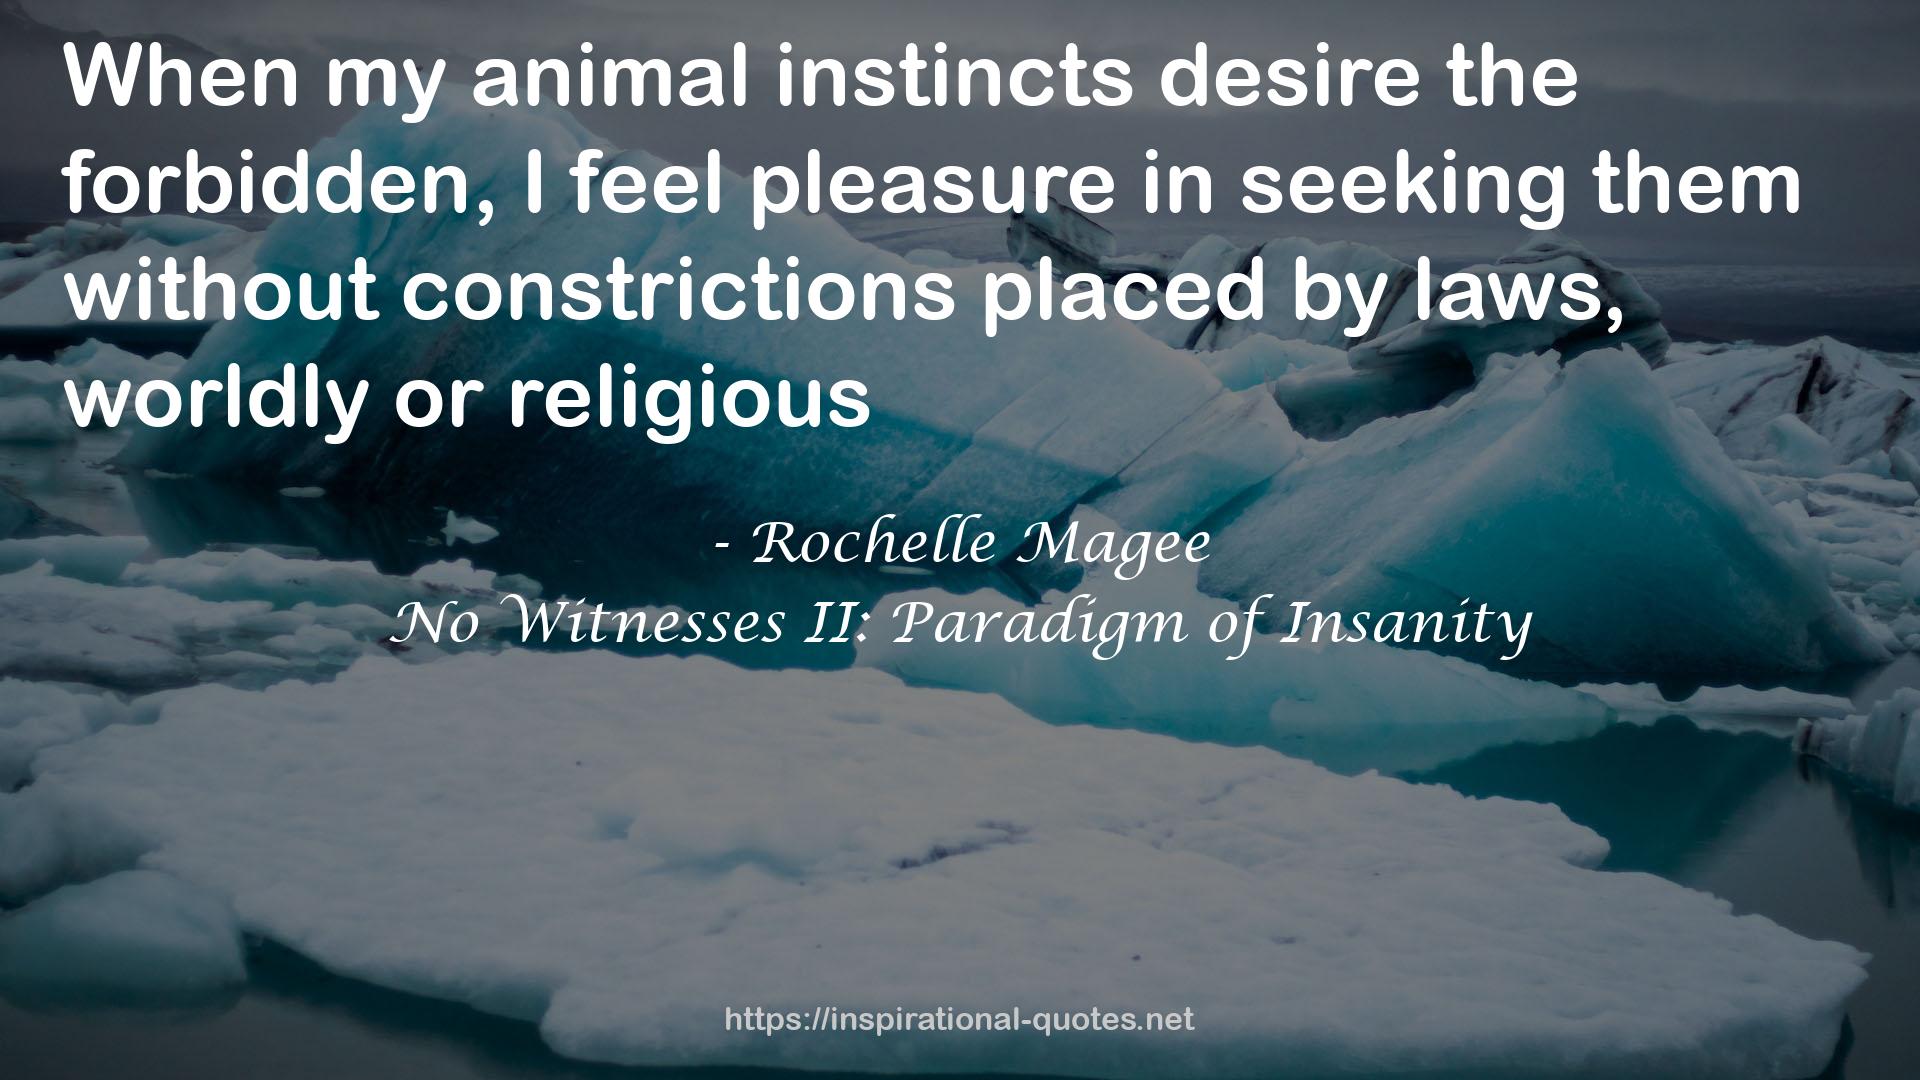 Rochelle Magee QUOTES